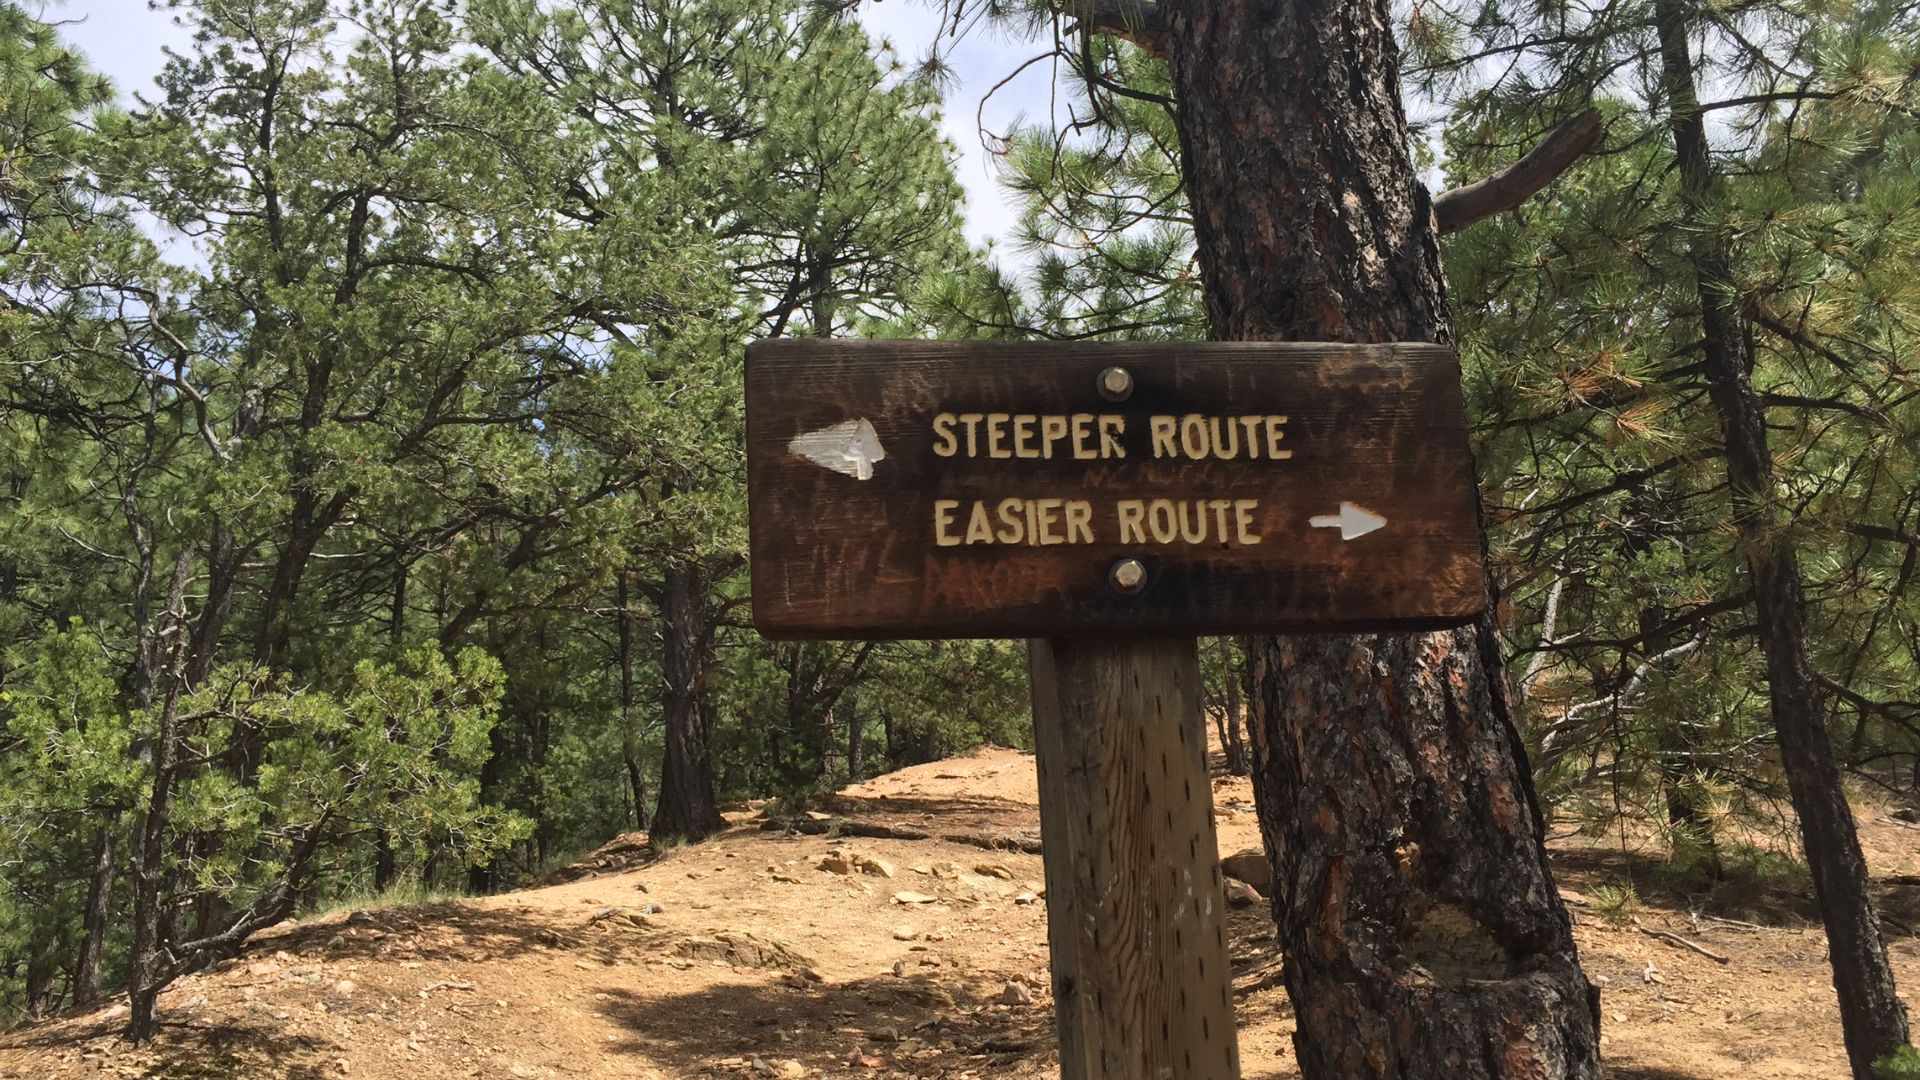 Dirt trail in Santa Fe with wooden directional sign for steeper route and easier route.